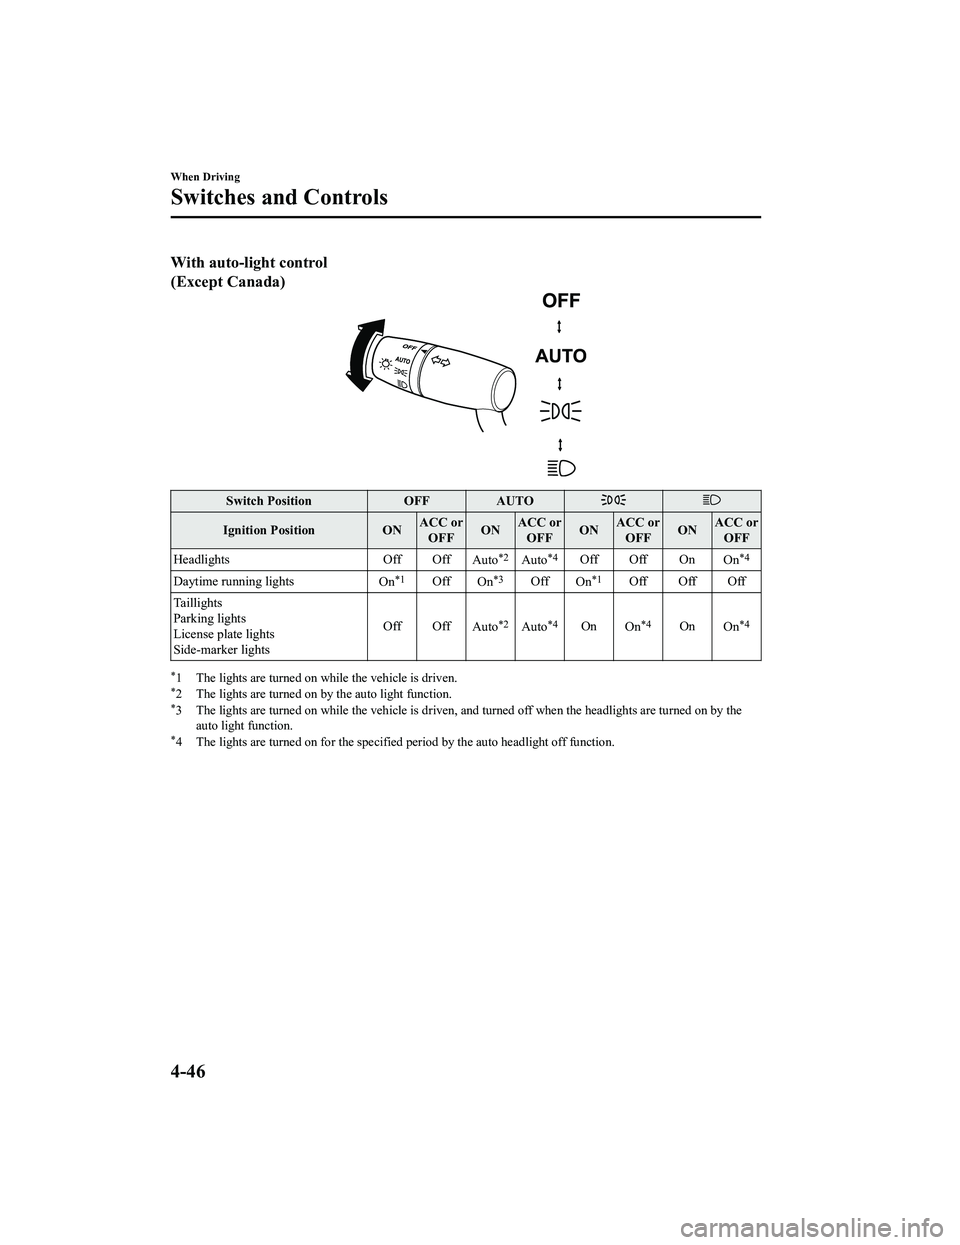 MAZDA MODEL MX-5 MIATA RF 2022  Owners Manual With auto-light control
(Except Canada)
Switch PositionOFFAUTO
Ignition Position ONACC or
OFF ONACC or
OFF ONACC or
OFF ONACC or
OFF
Headlights Off Off
Auto
*2Auto*4Off Off On On*4
Daytime running lig